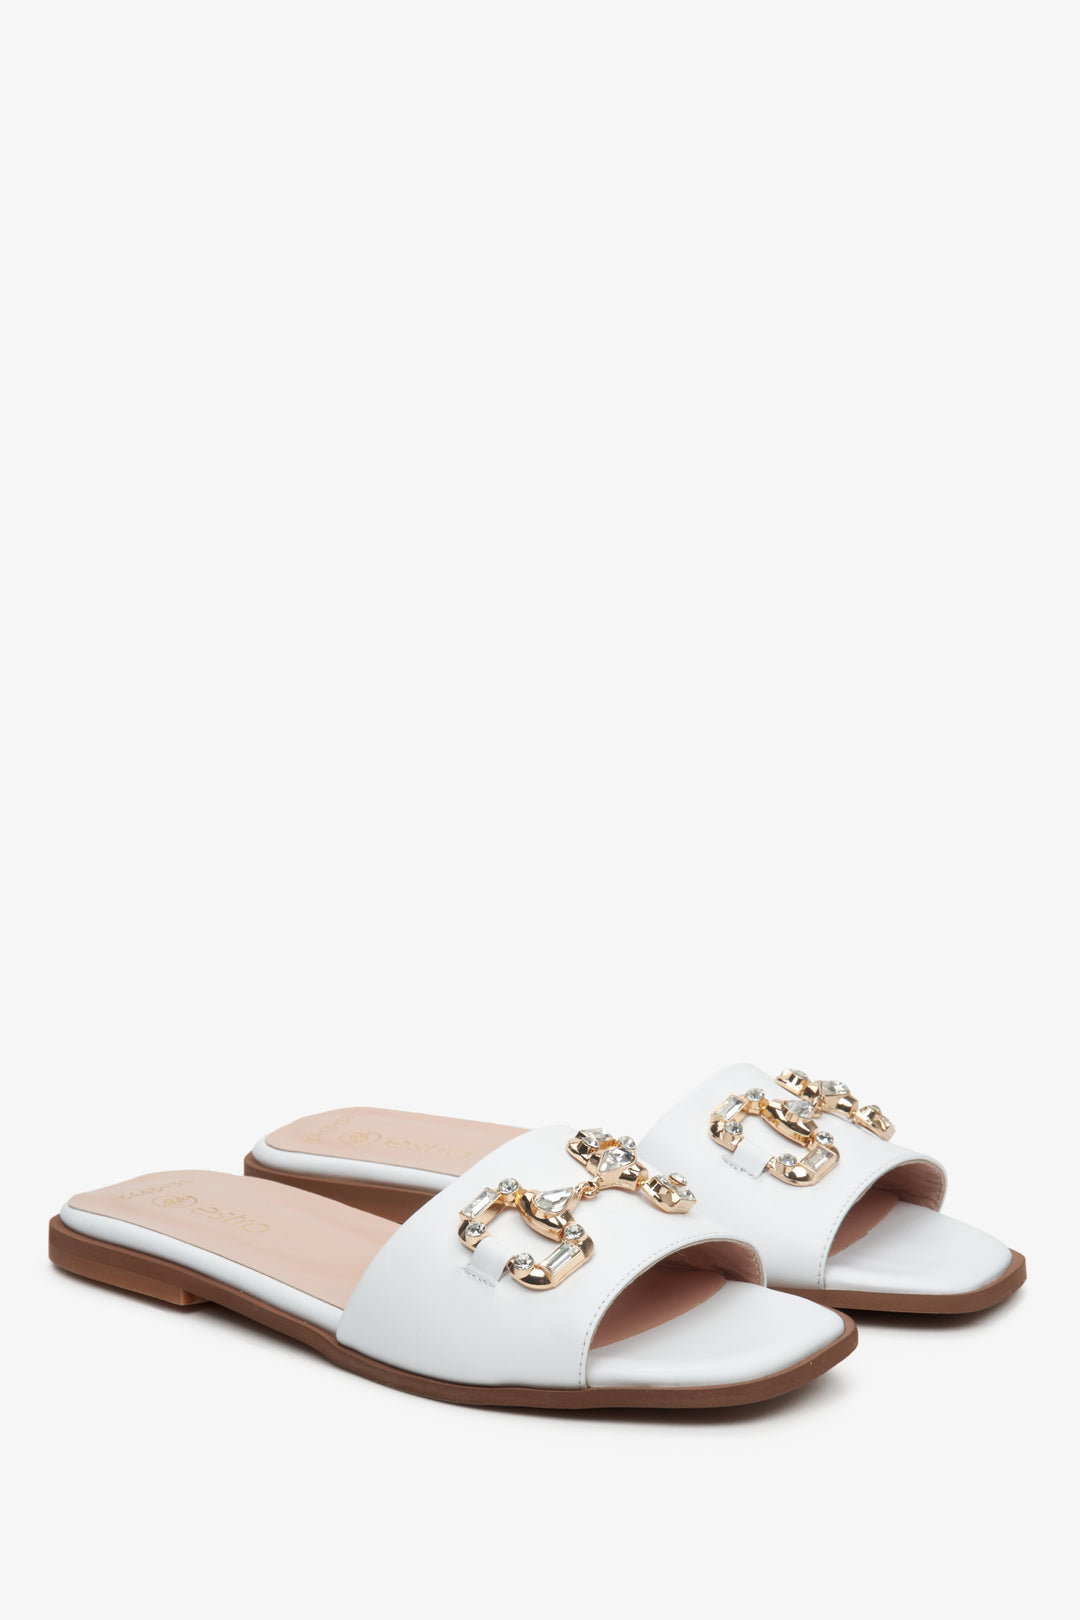 Women's slide sandals in white with gold appliqué in Estro natural leather.